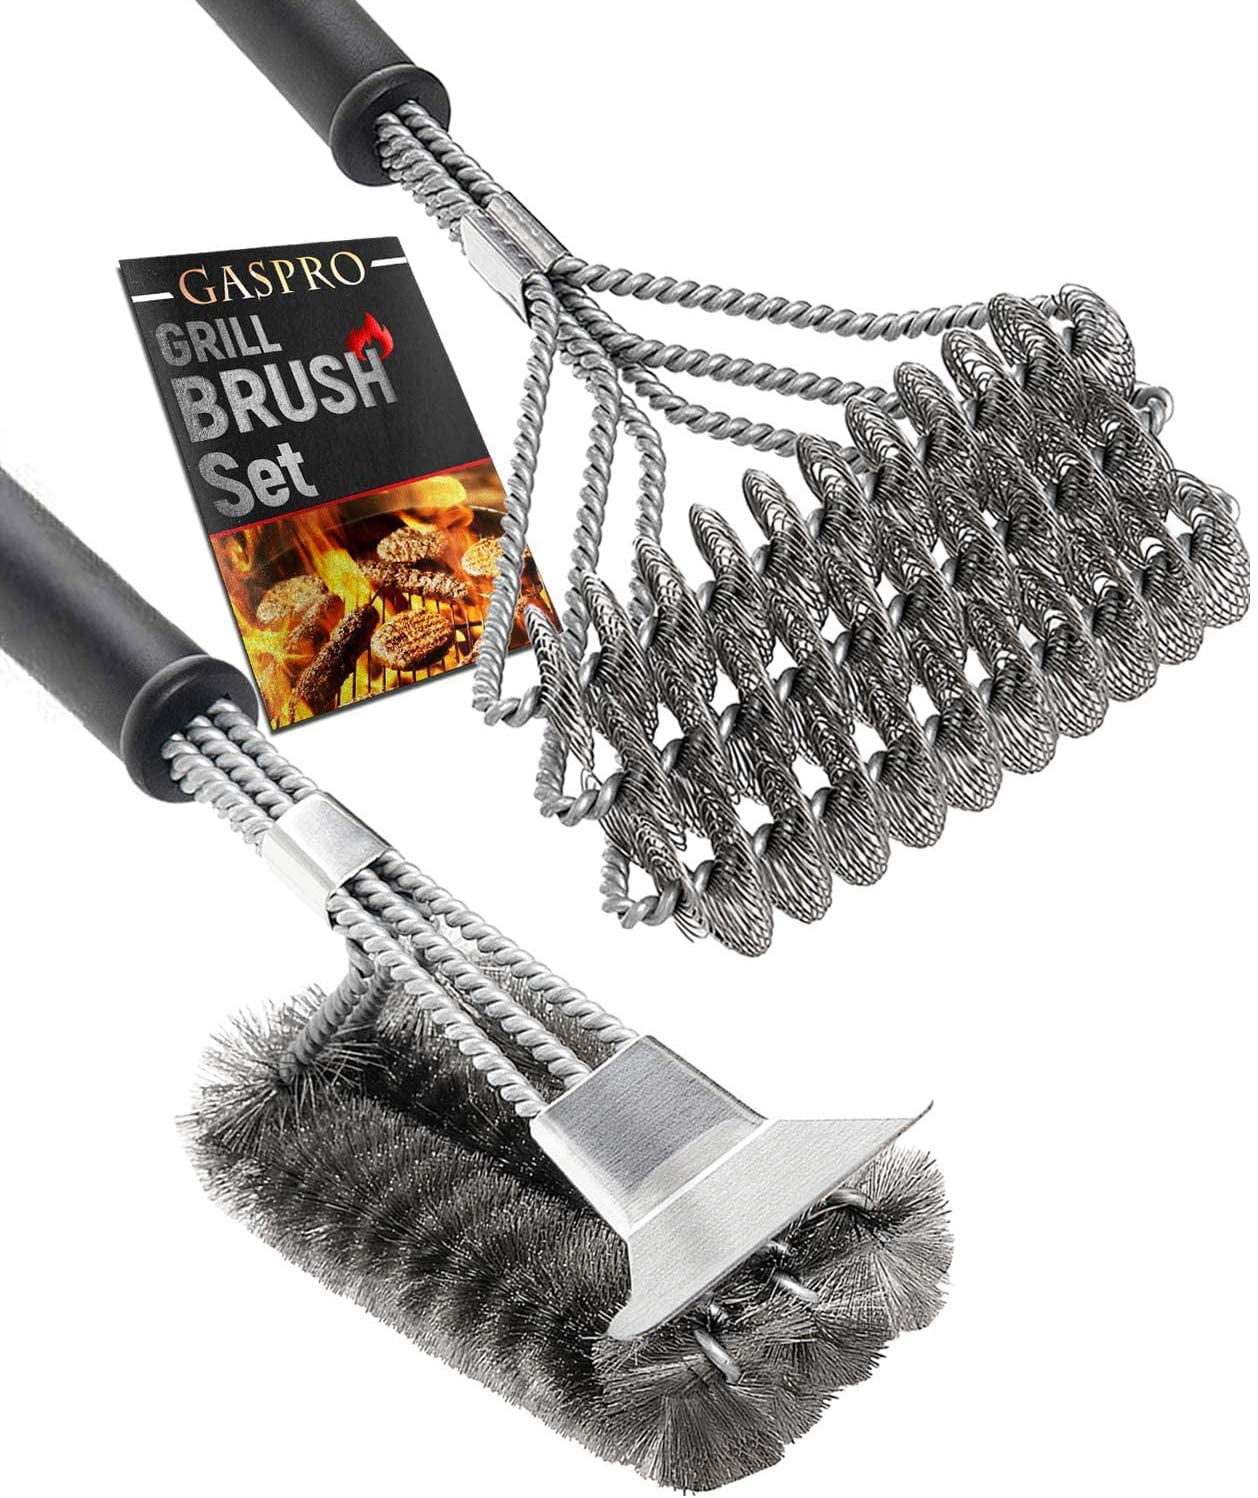 Waring Commercial Black Stainless Steel Heavy-Duty Panini Grill Cleaning  Brush